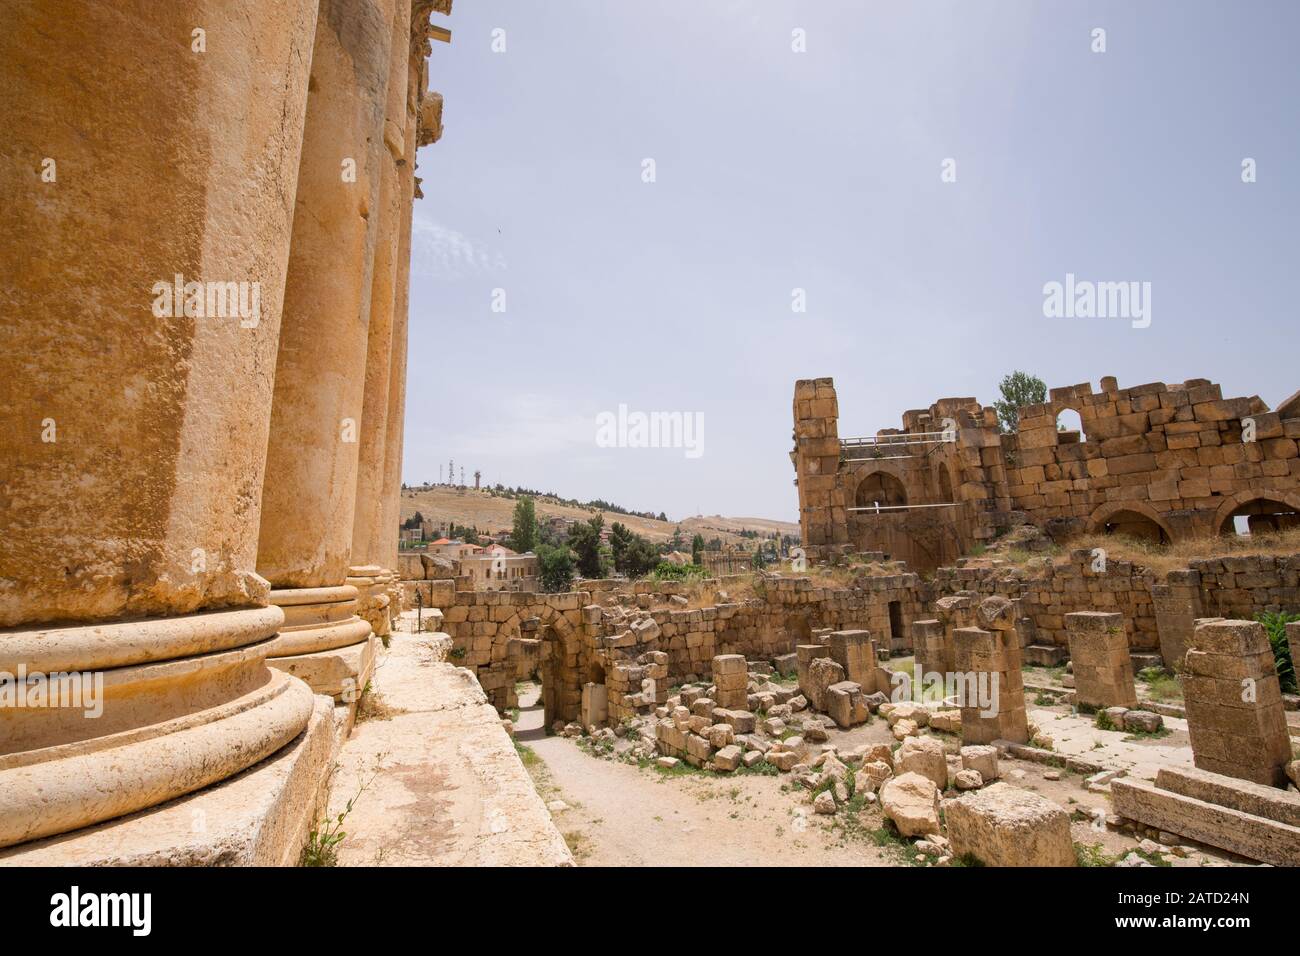 The ruins of the Roman city of Heliopolis or Baalbek in the Beqaa Valley. Baalbek, Lebanon - June, 2019 Stock Photo